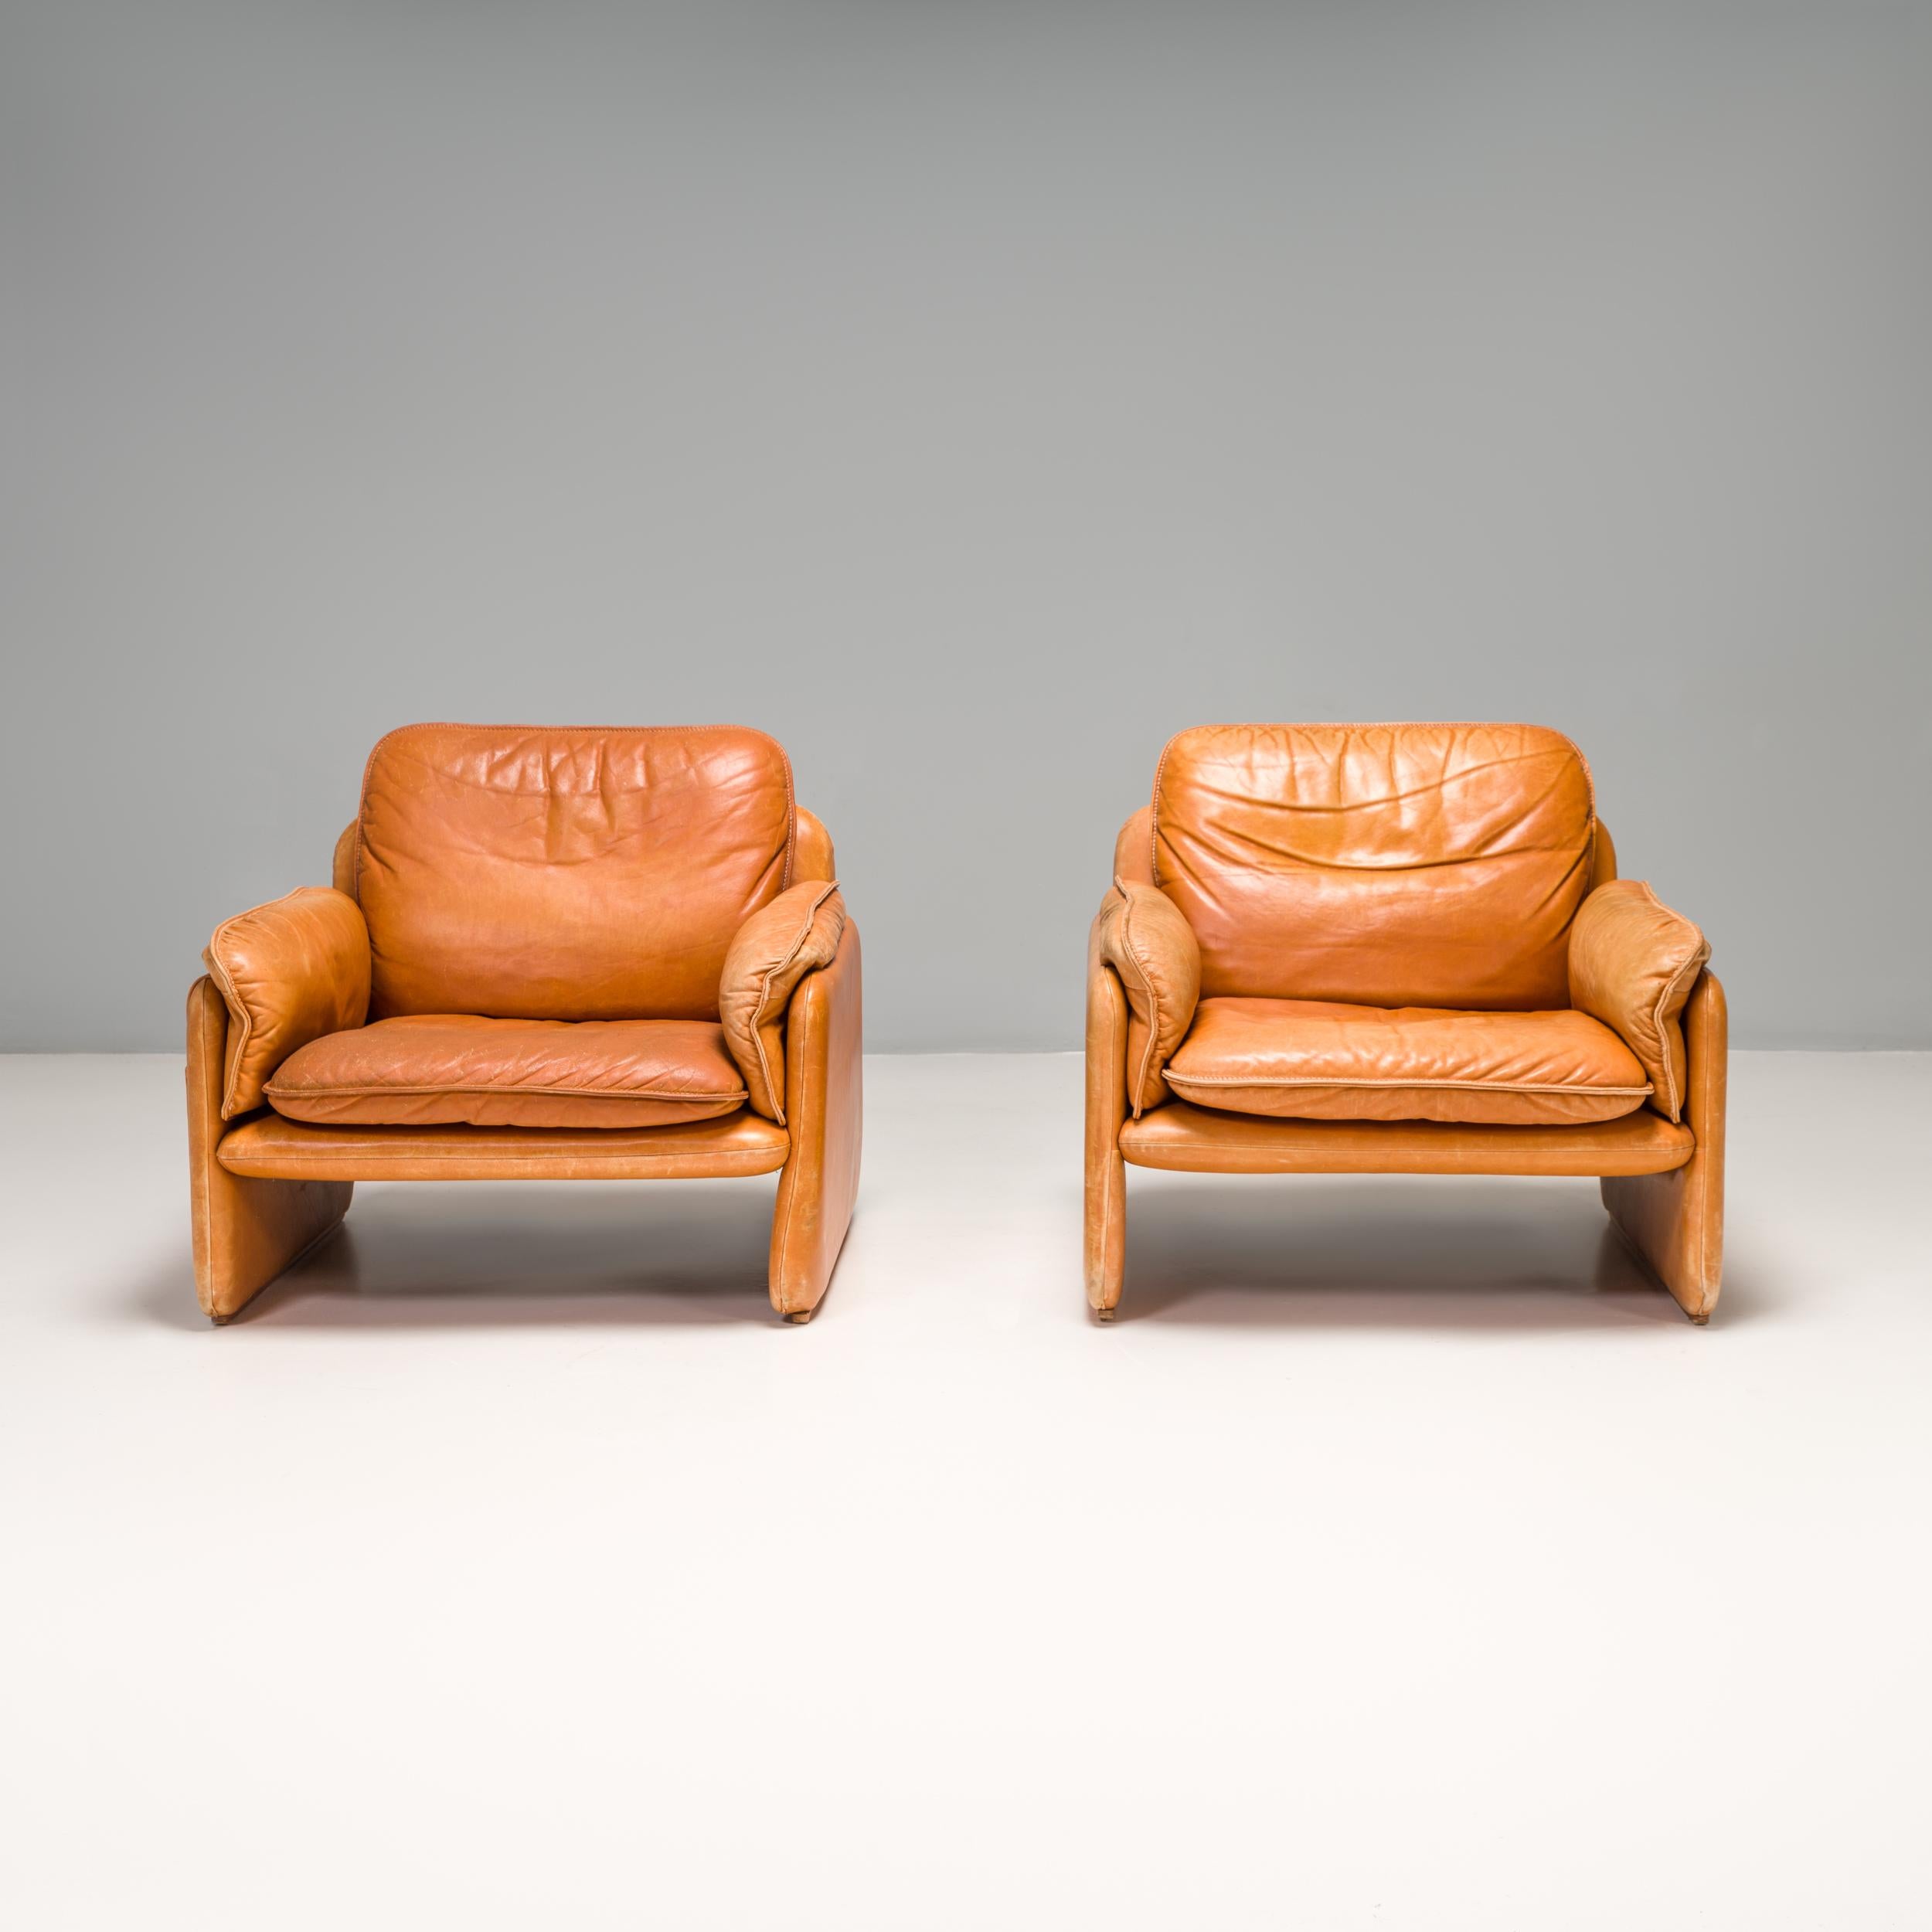 An iconic mid century design, the De Sede DS-61 is no longer in production making it a collectible piece from the furniture manufacturer.

Fully upholstered in soft cognac leather, this armchair features a slimline frame with curved edges to